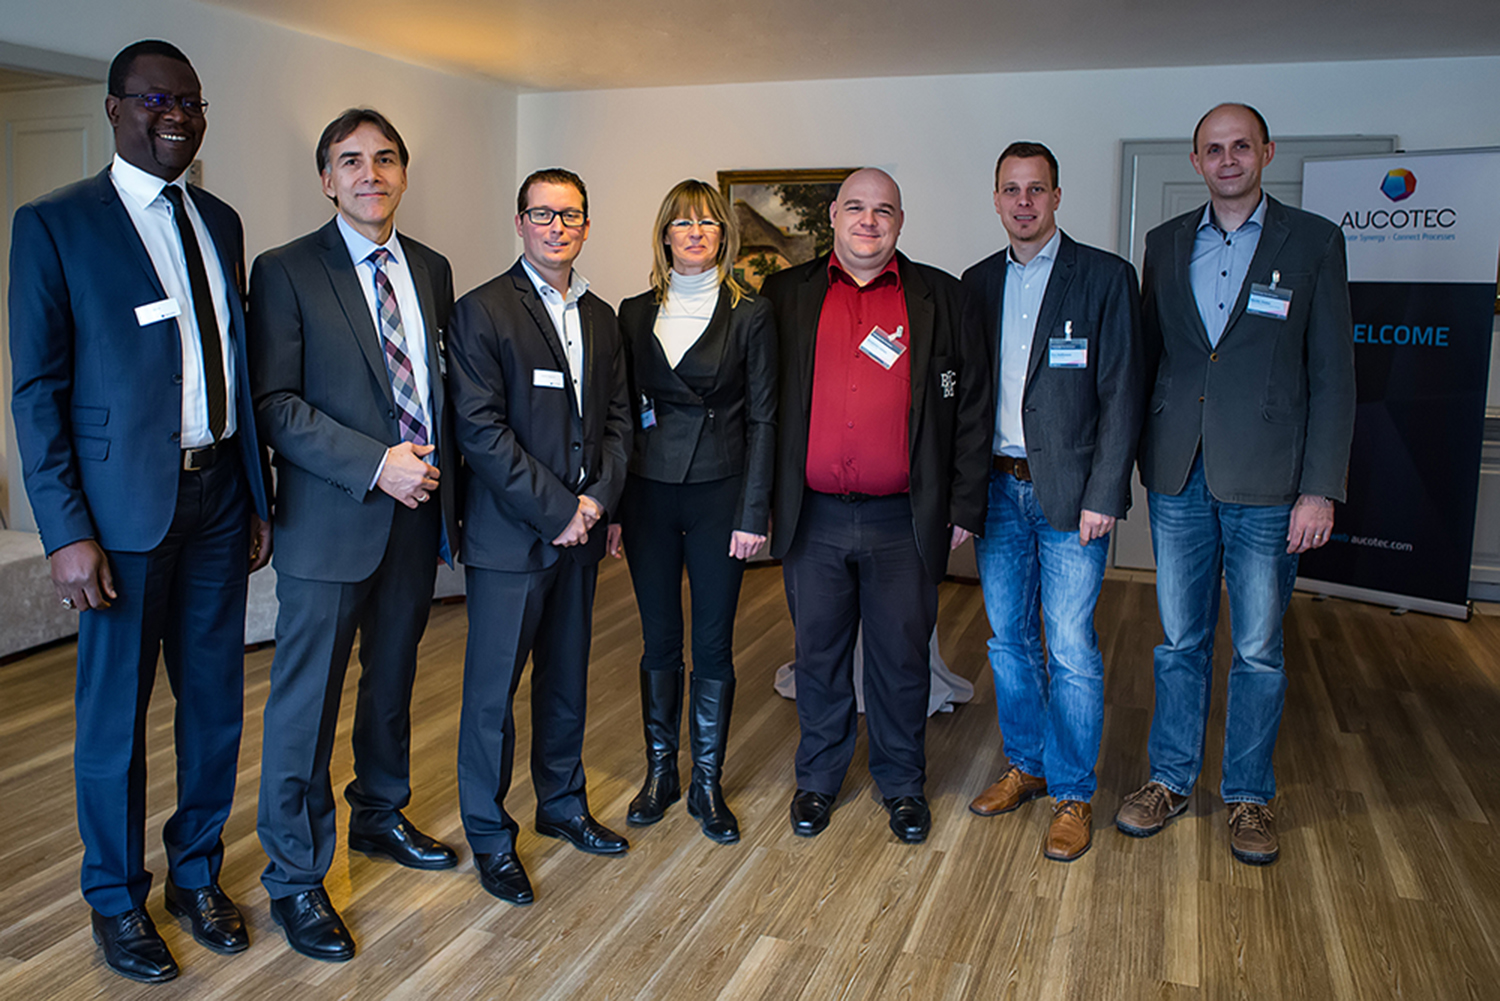 Speakers on the Technology Day: (from left: Djibi Dia (Aucotec, for Thales Alenia Space), Dr. Anton Ferner (CADPart), Jérôme Anguenot (Aucotec, for Thales Alenia Space), Birgit Smuda (Sysberry), Benjamin Lamey (OHB System AG), Tim Hoffmann (Sysberry), Martin Huber, Airbus